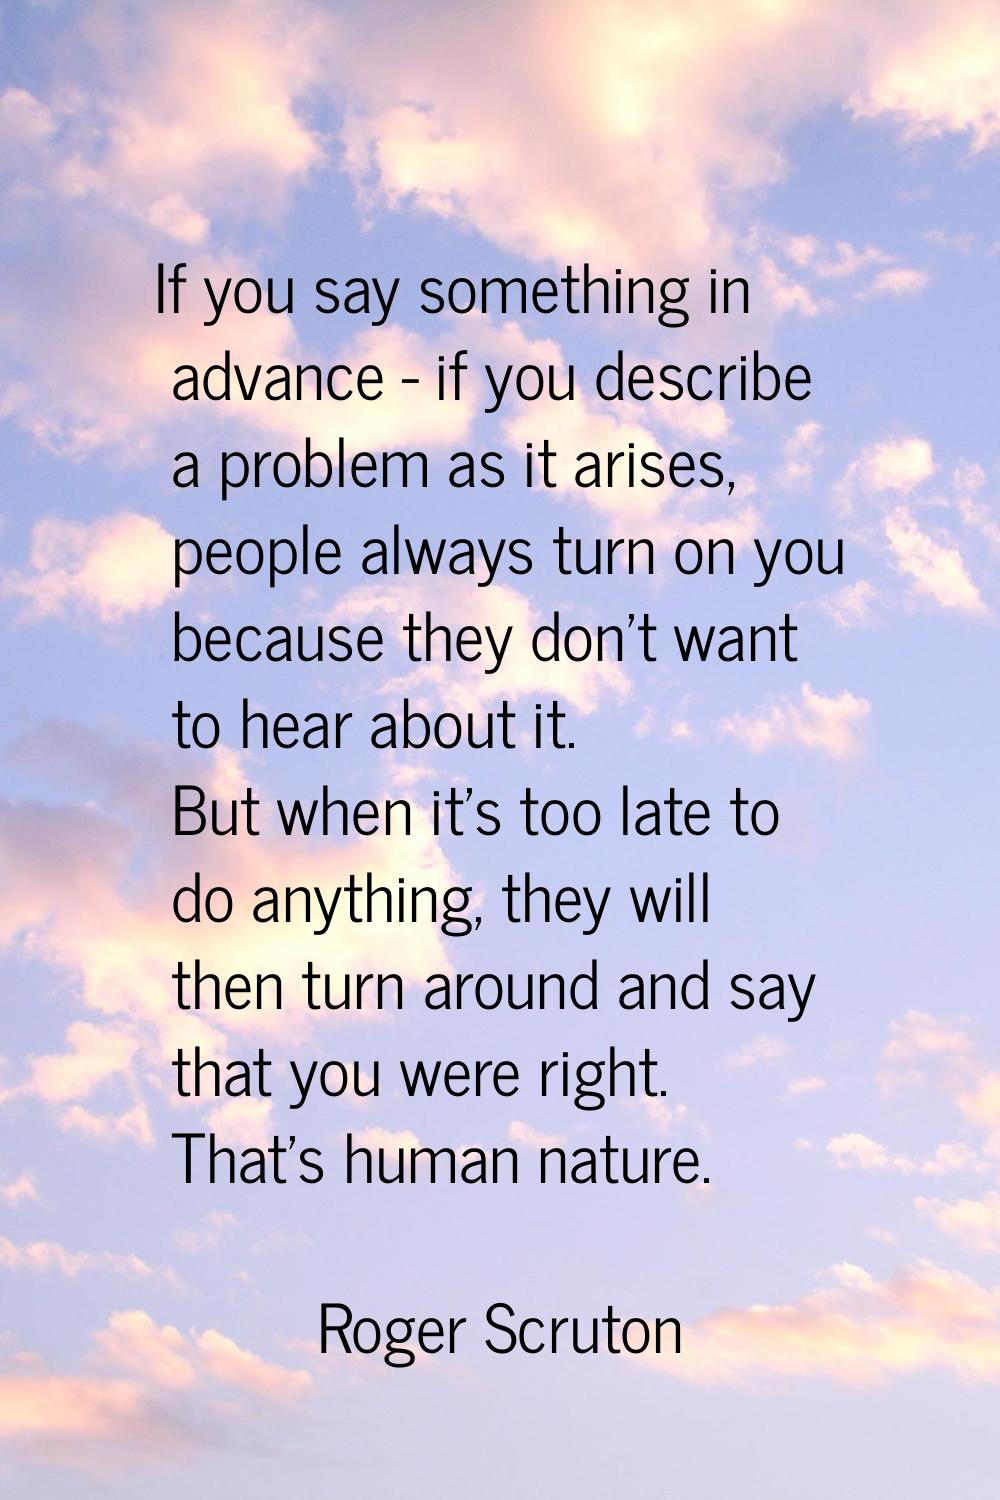 If you say something in advance - if you describe a problem as it arises, people always turn on you